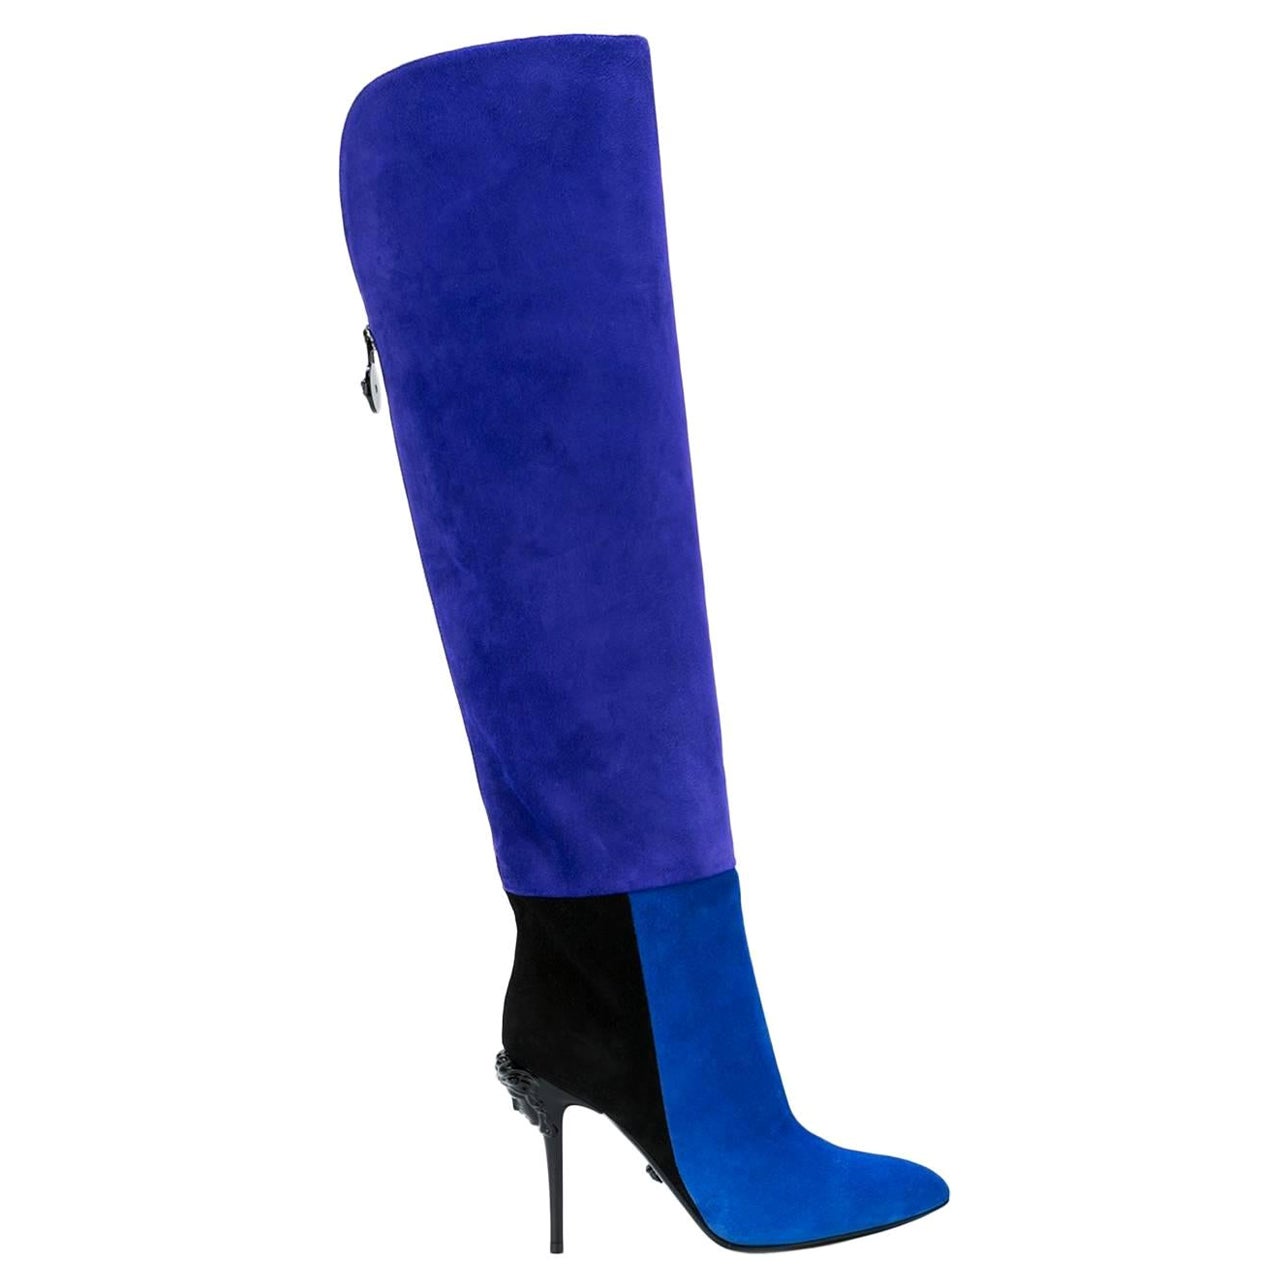 New VERSACE COLOR BLOCK BLUE SUEDE PALAZZO BOOTS 37 - 7 For Sale